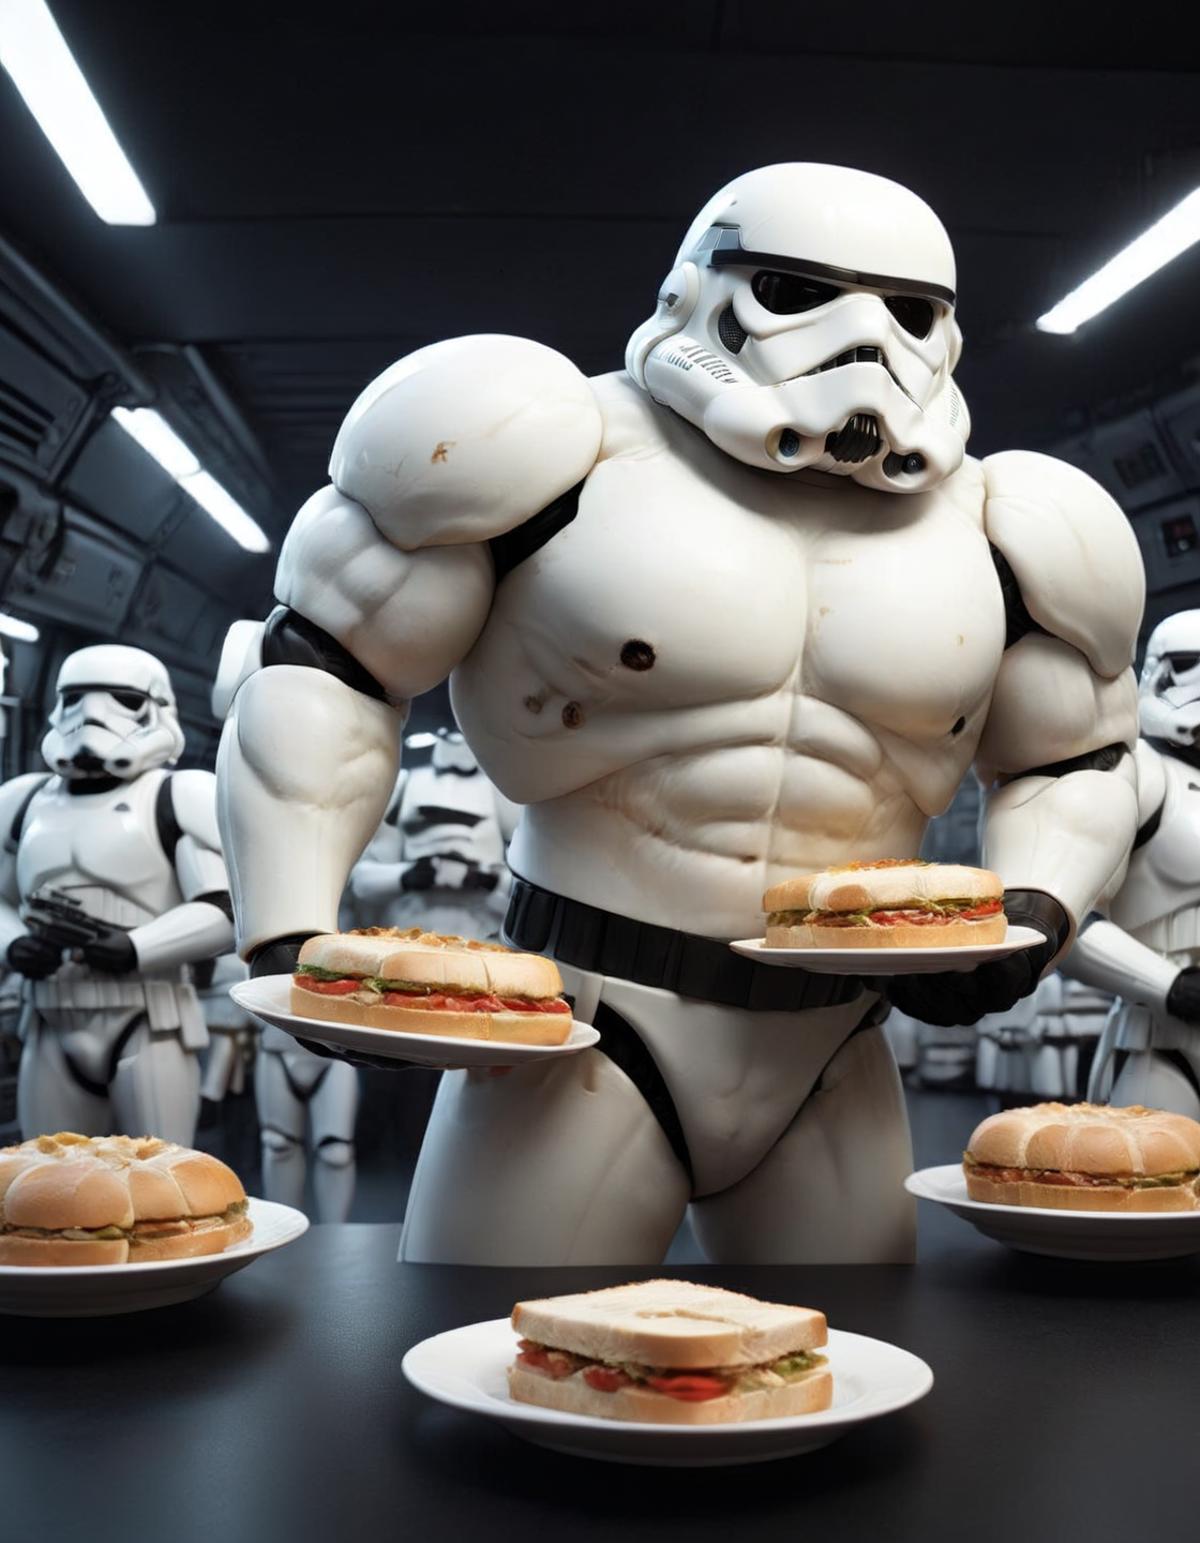 A Stormtrooper holding plates of sandwiches.